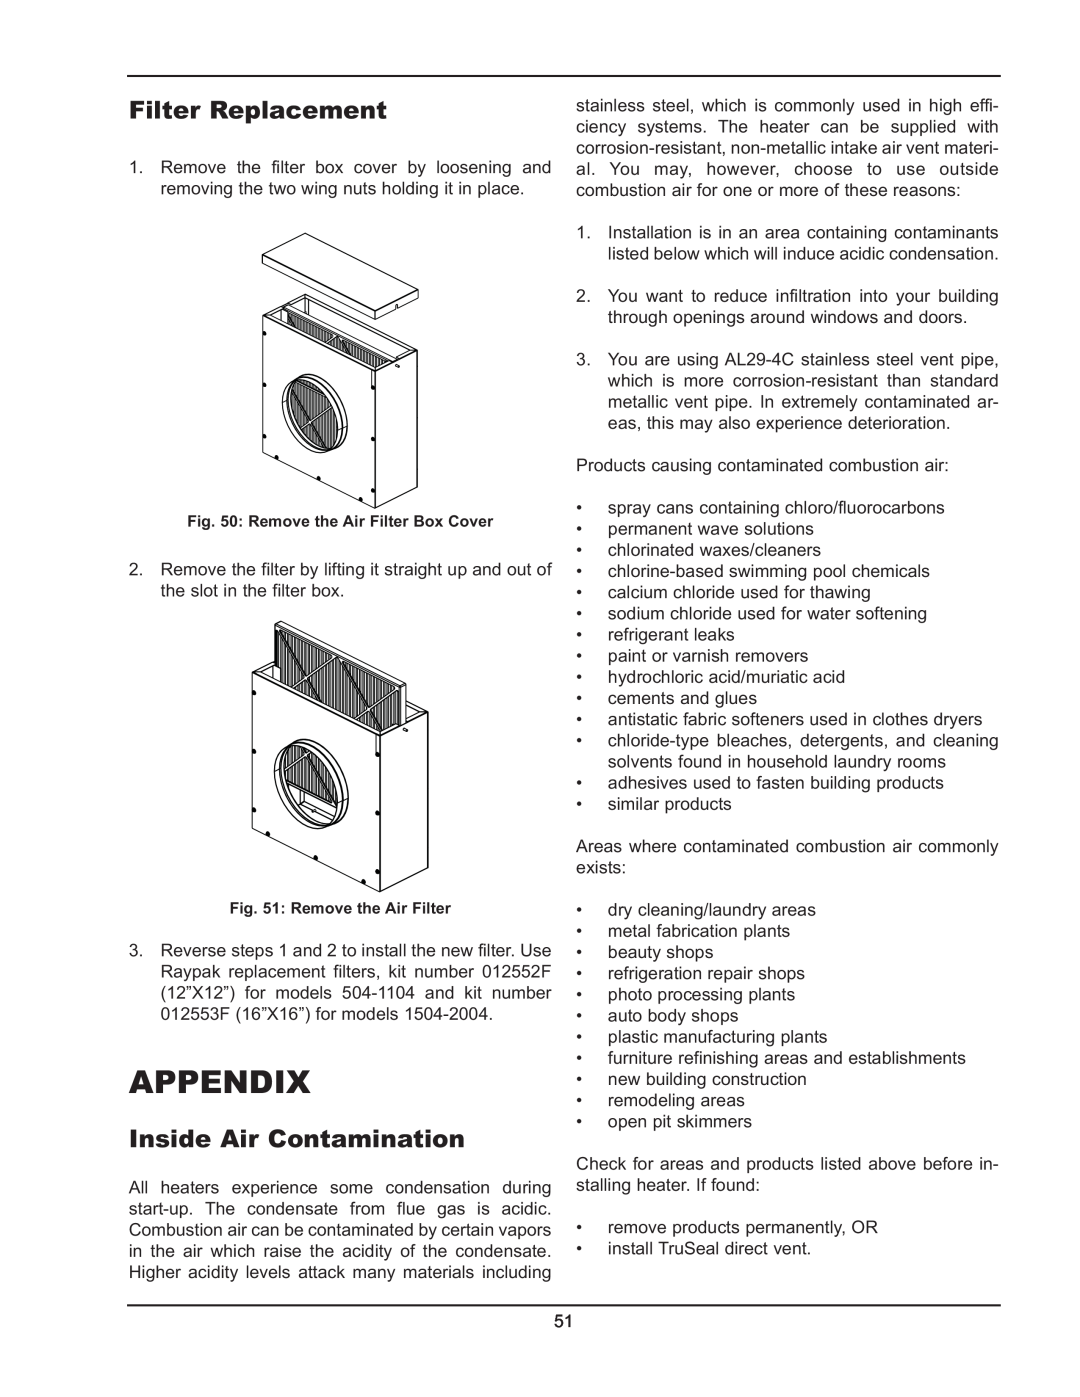 Raypak 5042004 operating instructions Appendix, Filter Replacement, Inside Air Contamination 